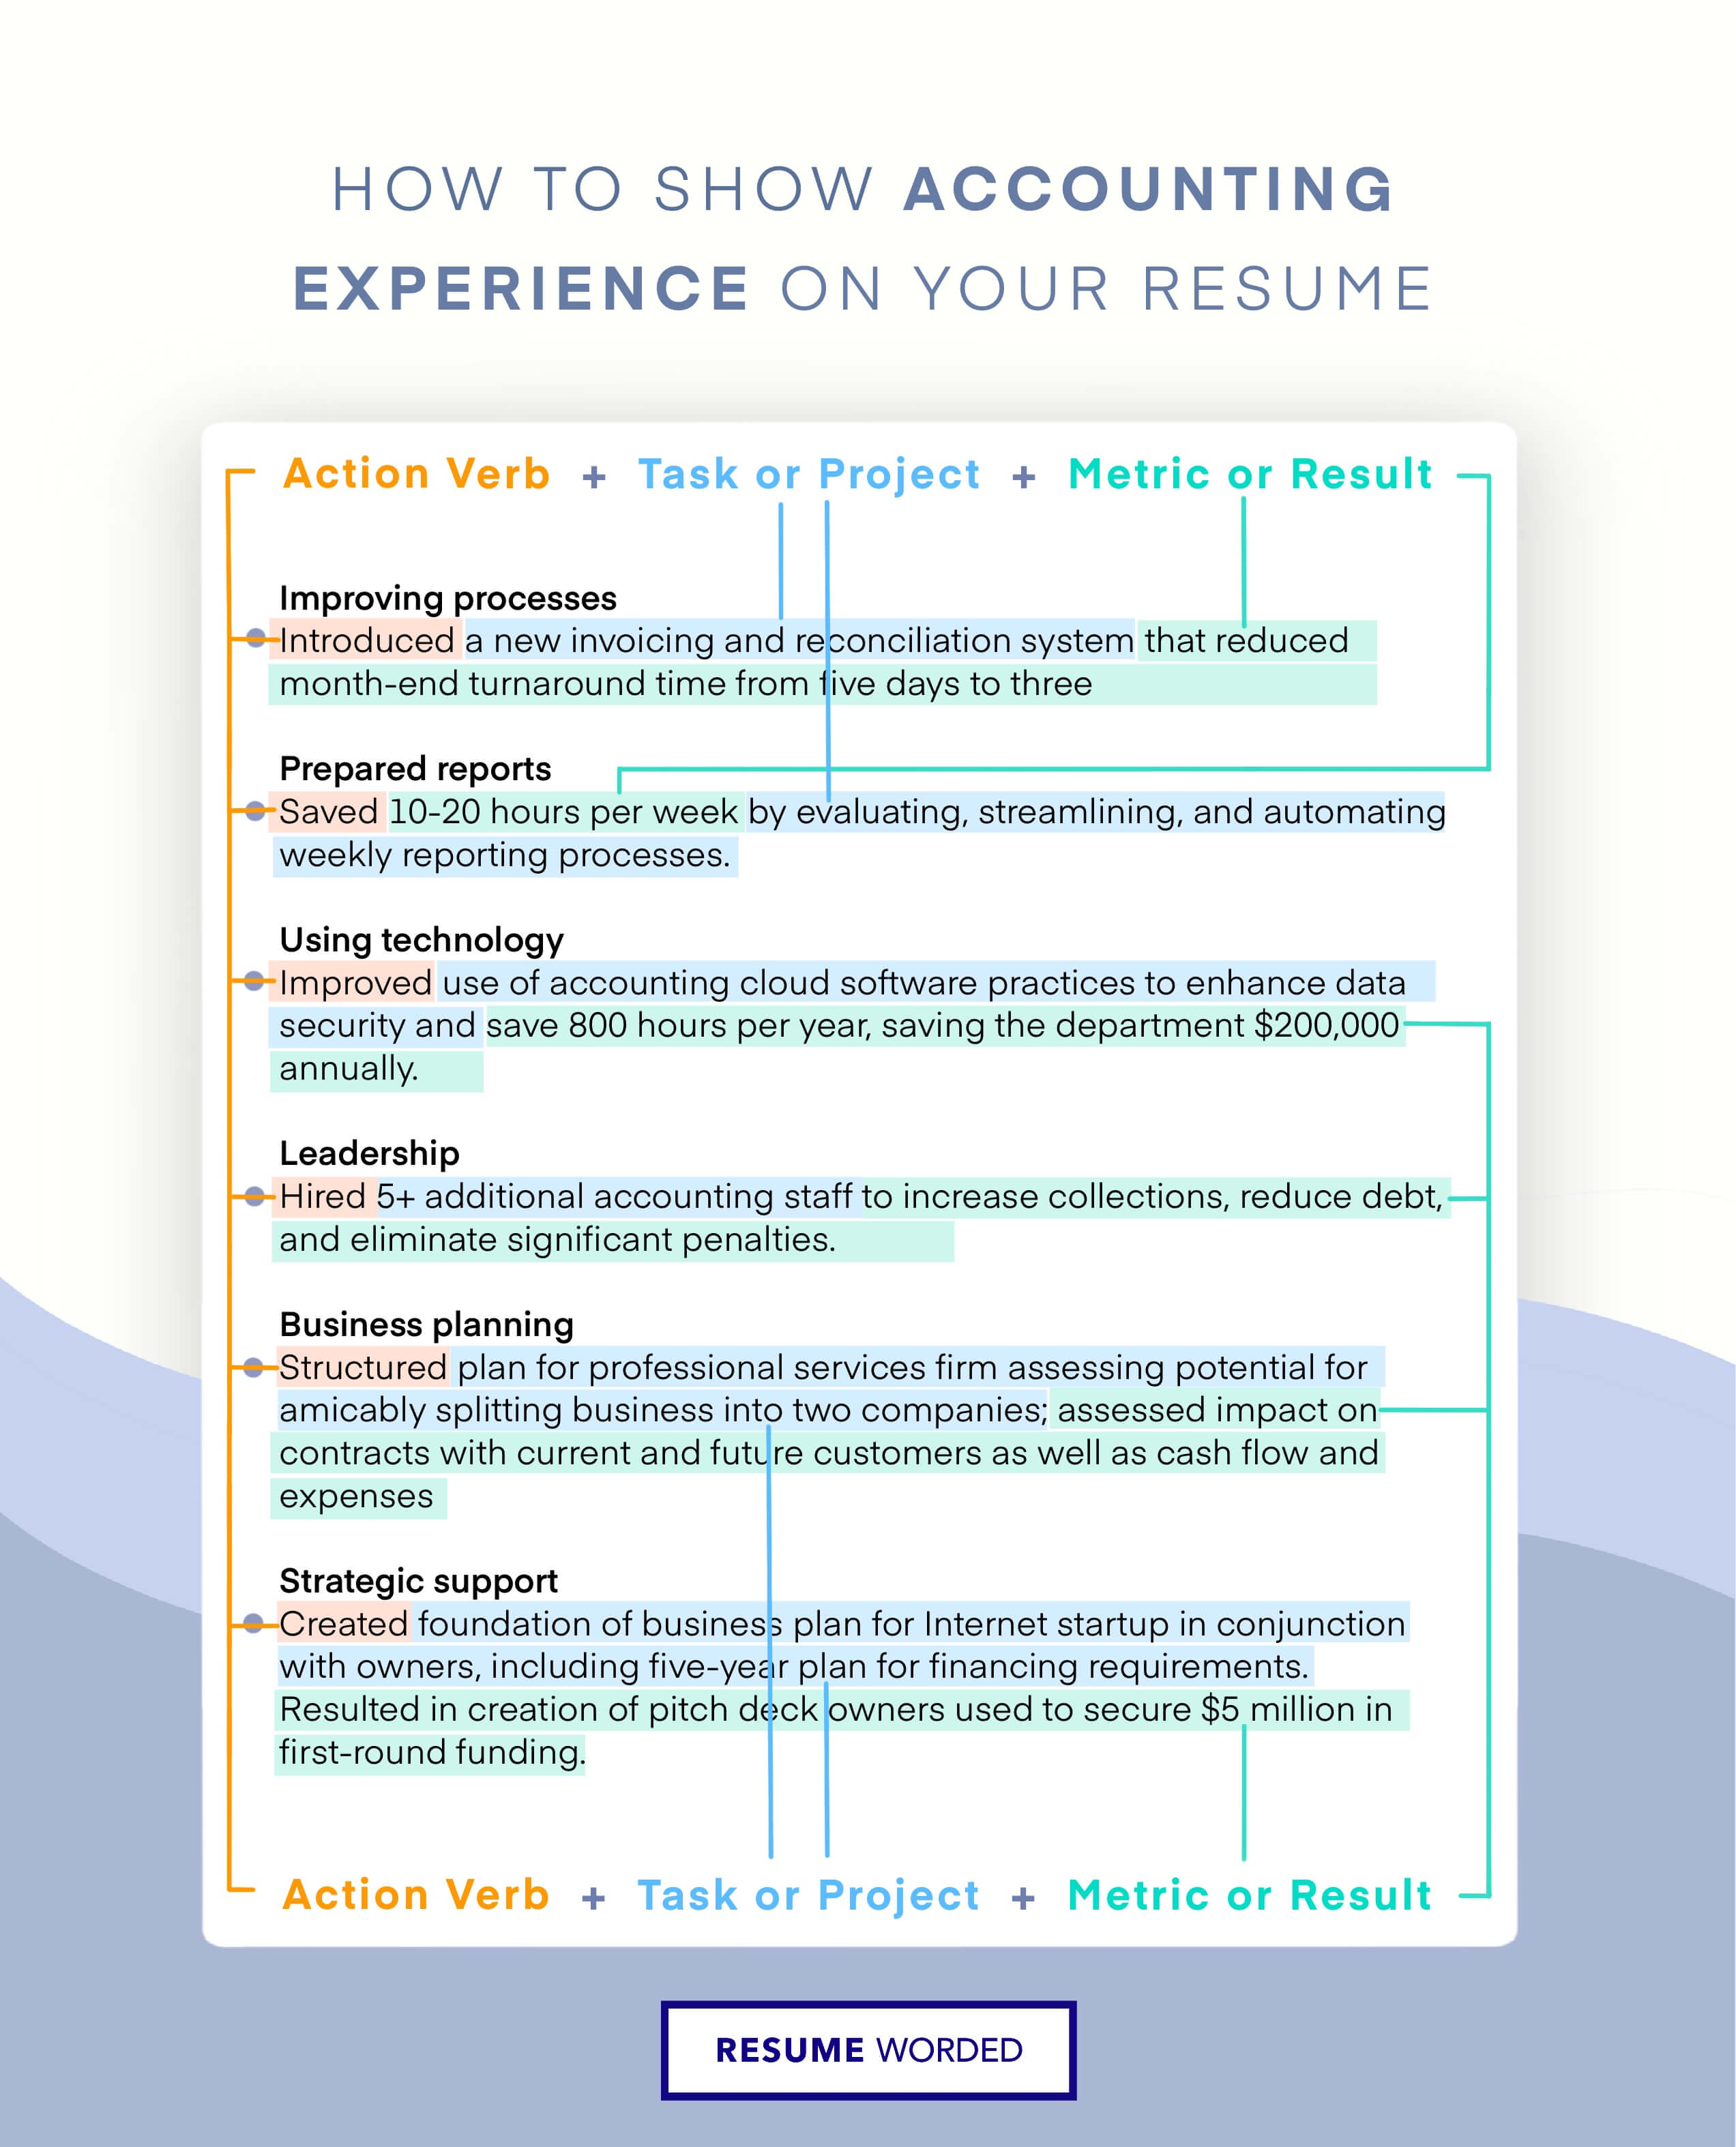 Resume is focused on the specific accounting position - Accounting Assistant Resume